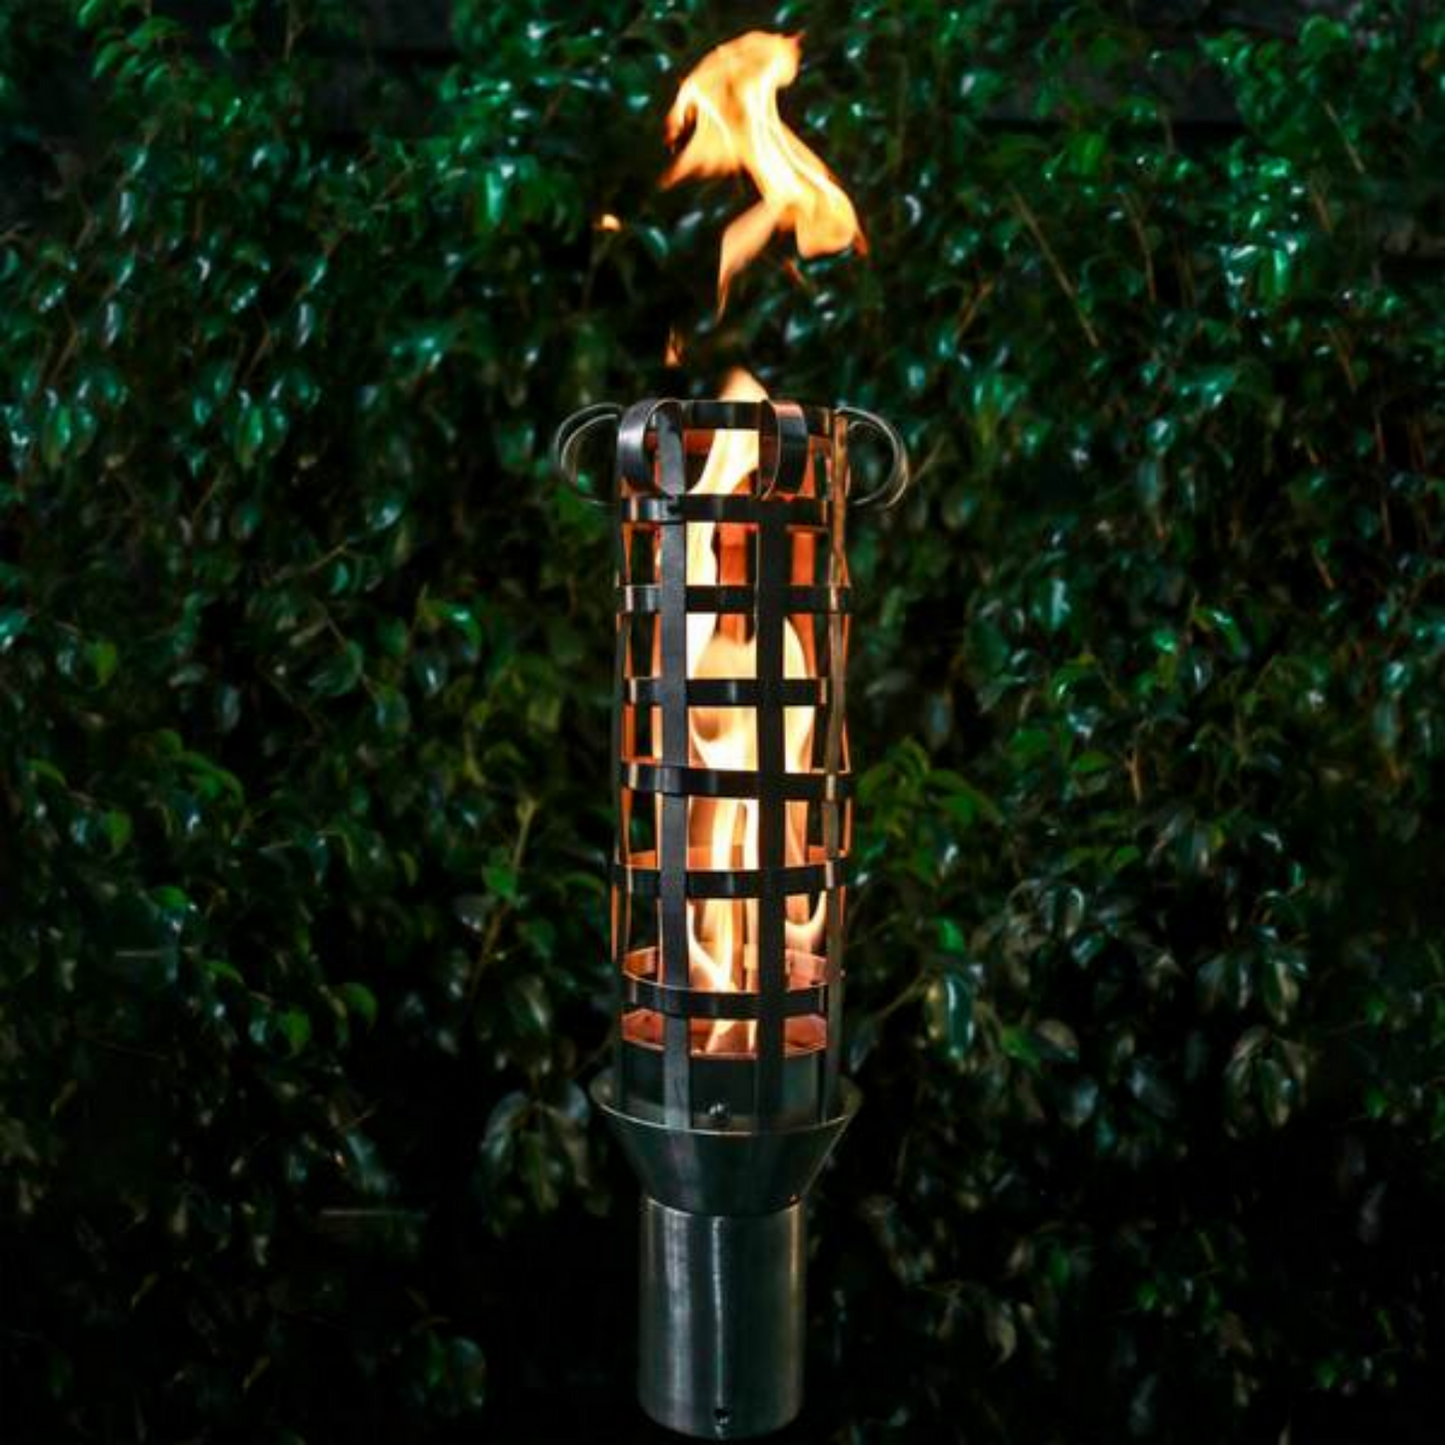 Backyard Tiki Torch The Outdoor Plus, Woven Original TOP Torch & Post Complete - Stainless Steel - Liquid Propane | OPT-TPK16LP